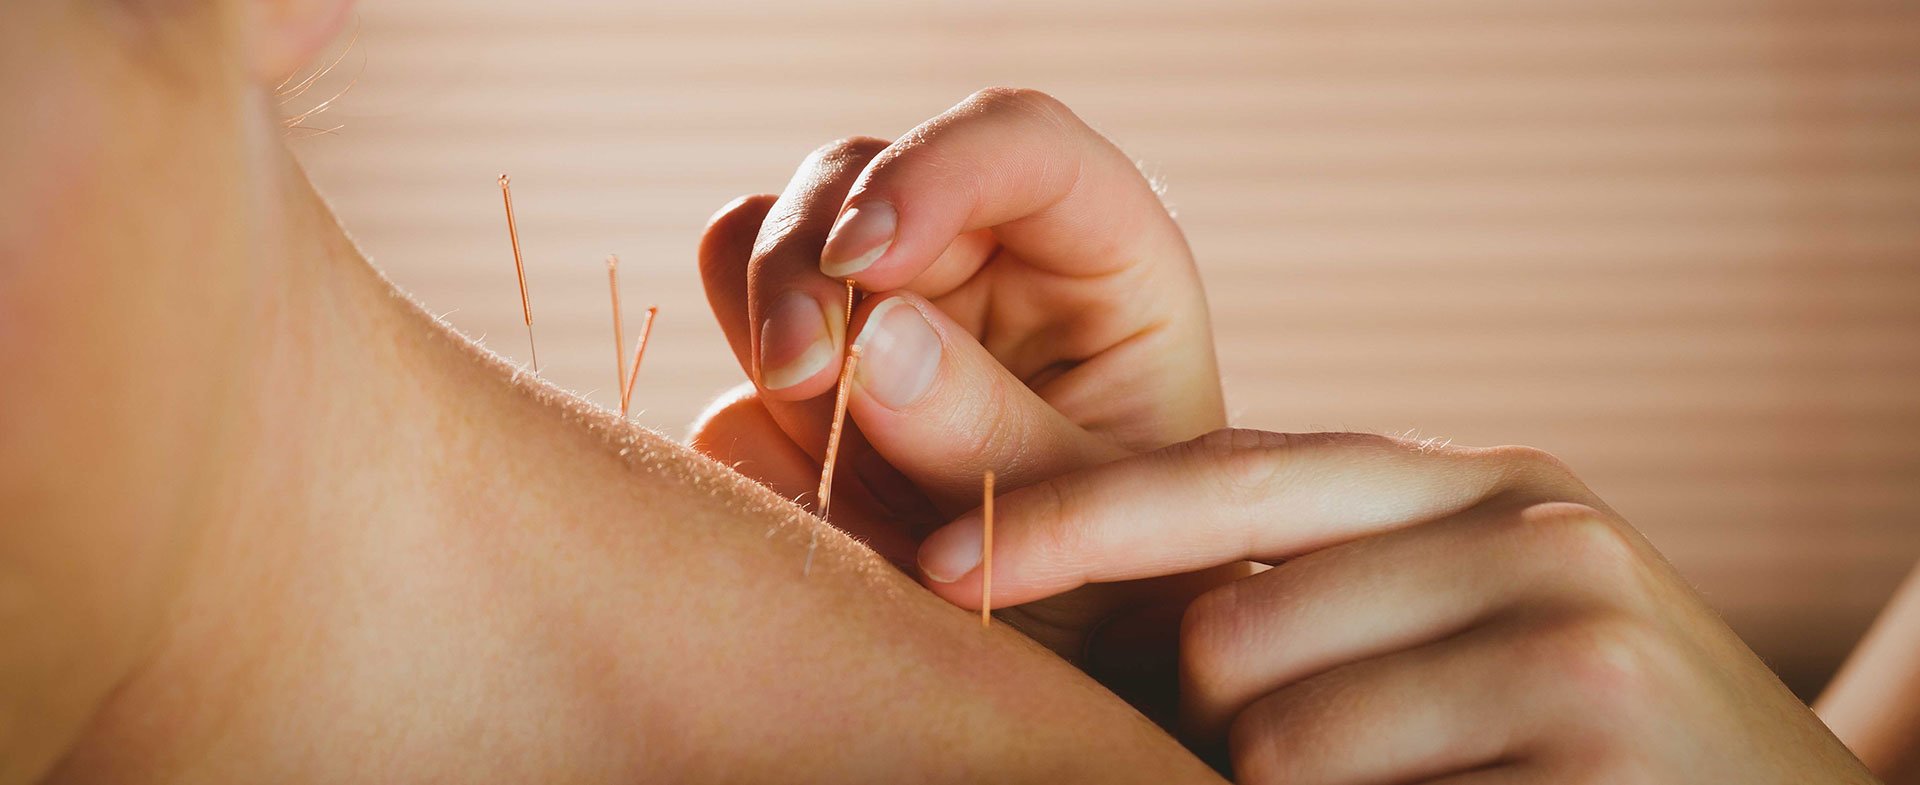 acupuncture for women